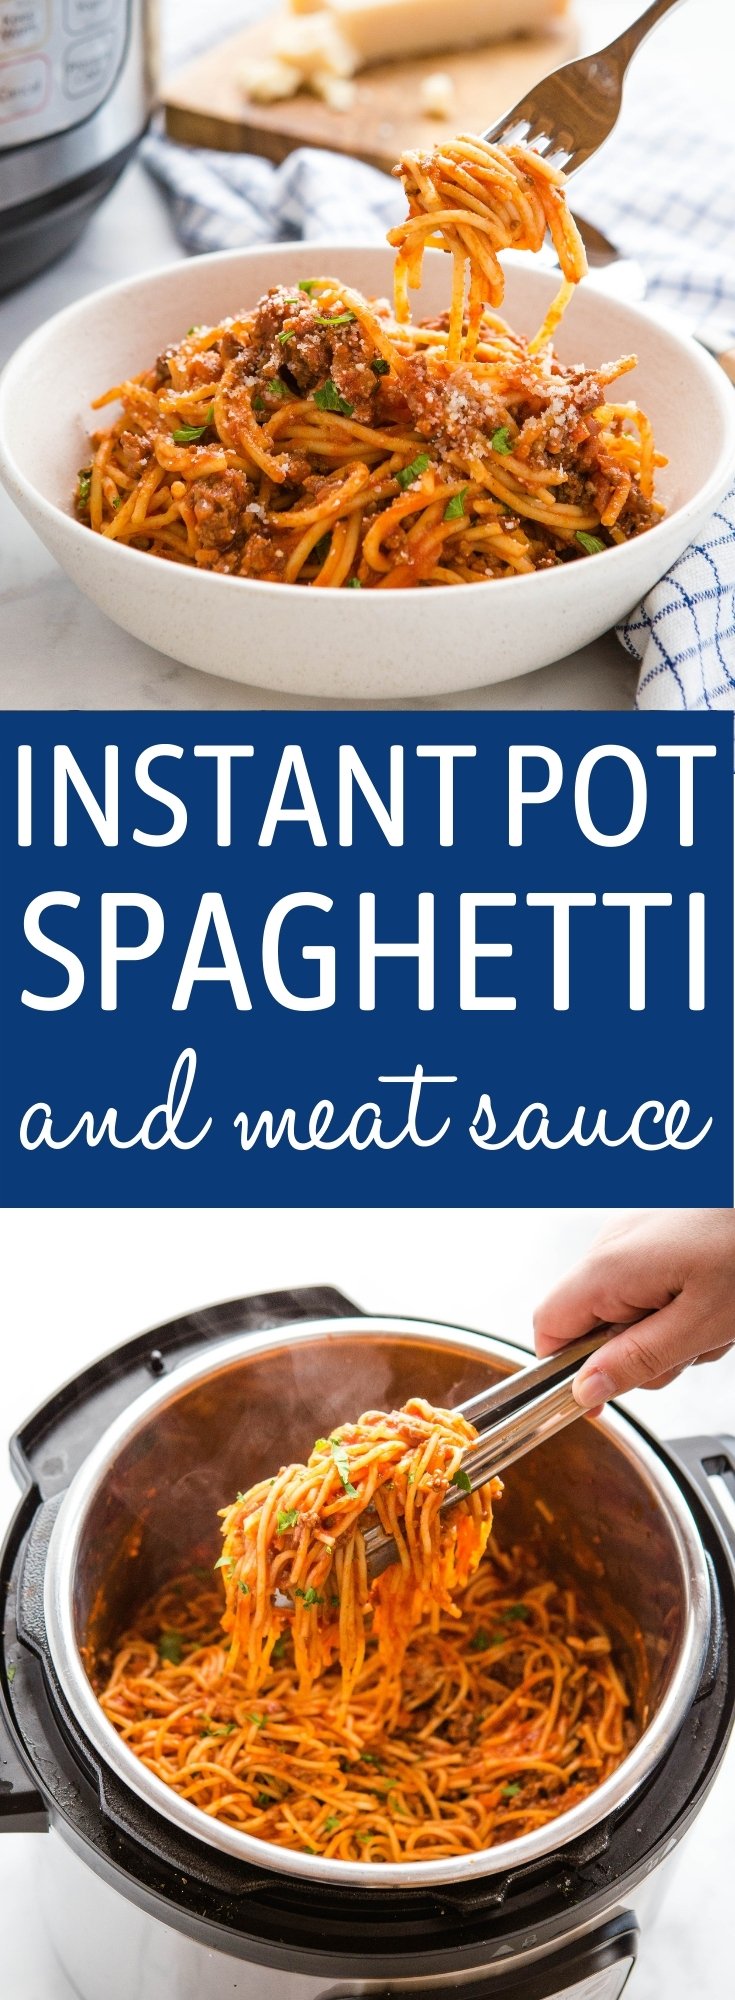 Instant Pot Spaghetti and Meat Sauce Recipe Pinterest